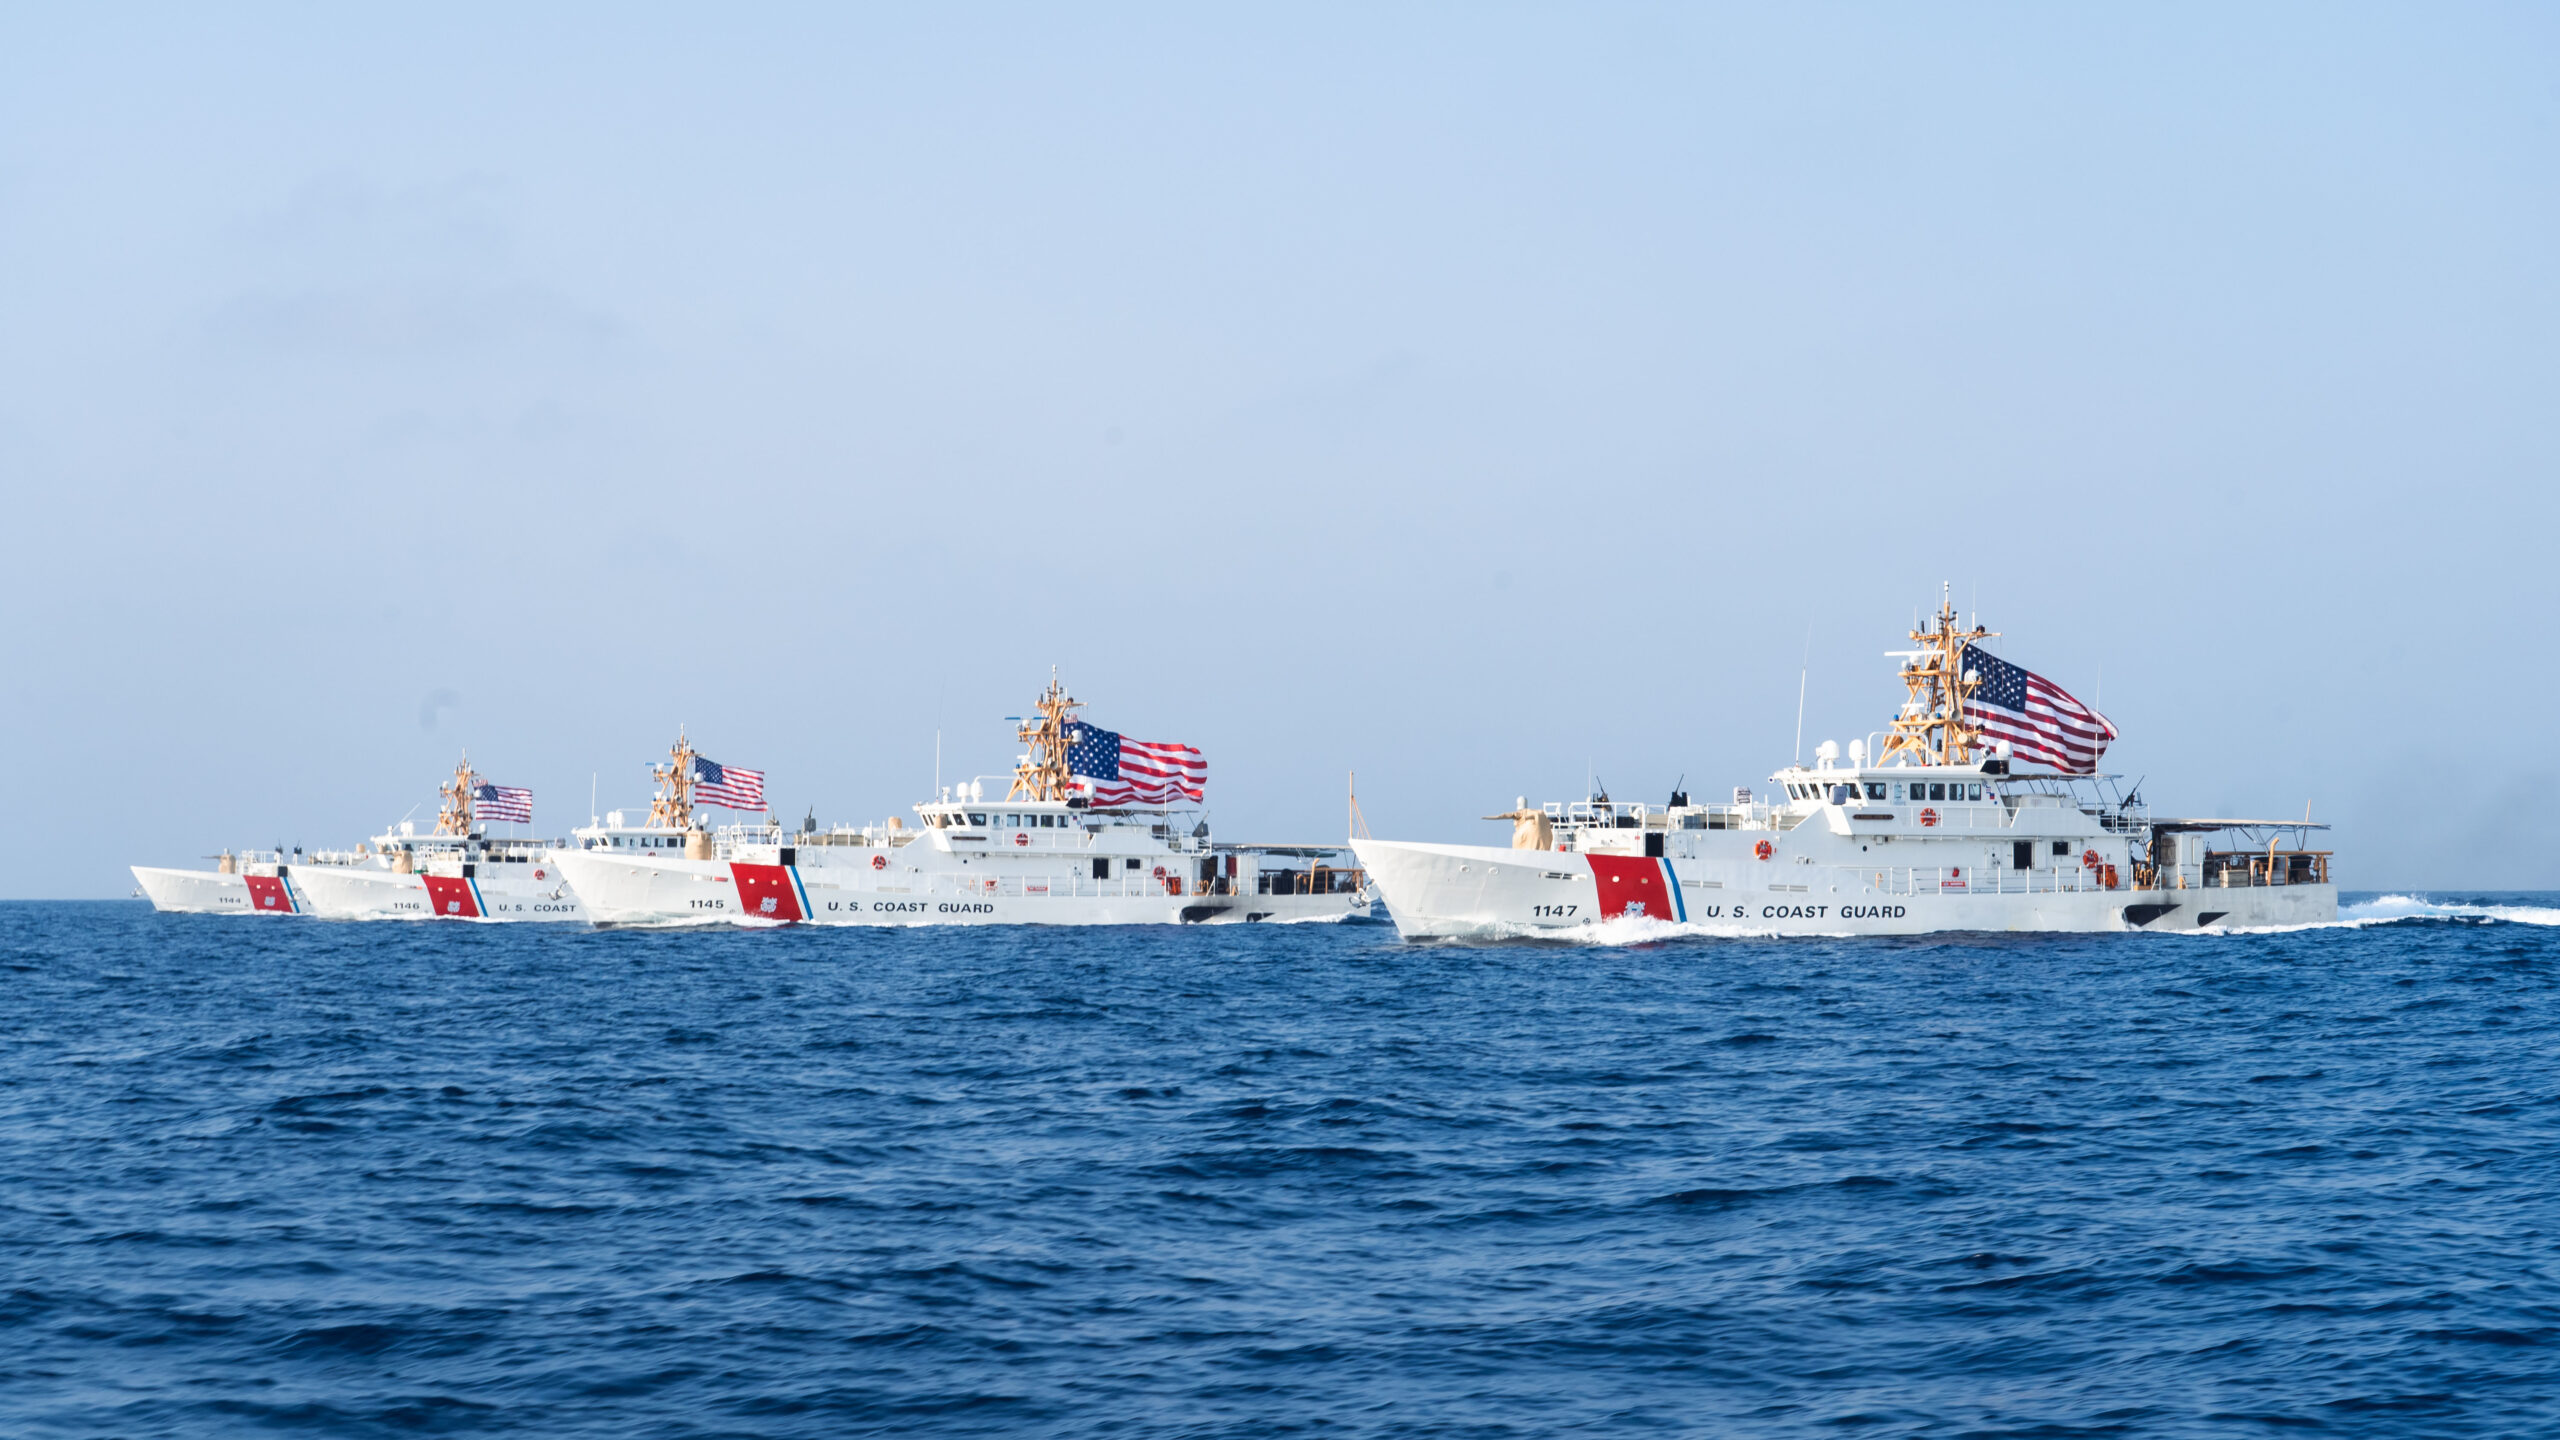 Sentinel-class fast response cutters (FRC) at USCG Bahrain Station.